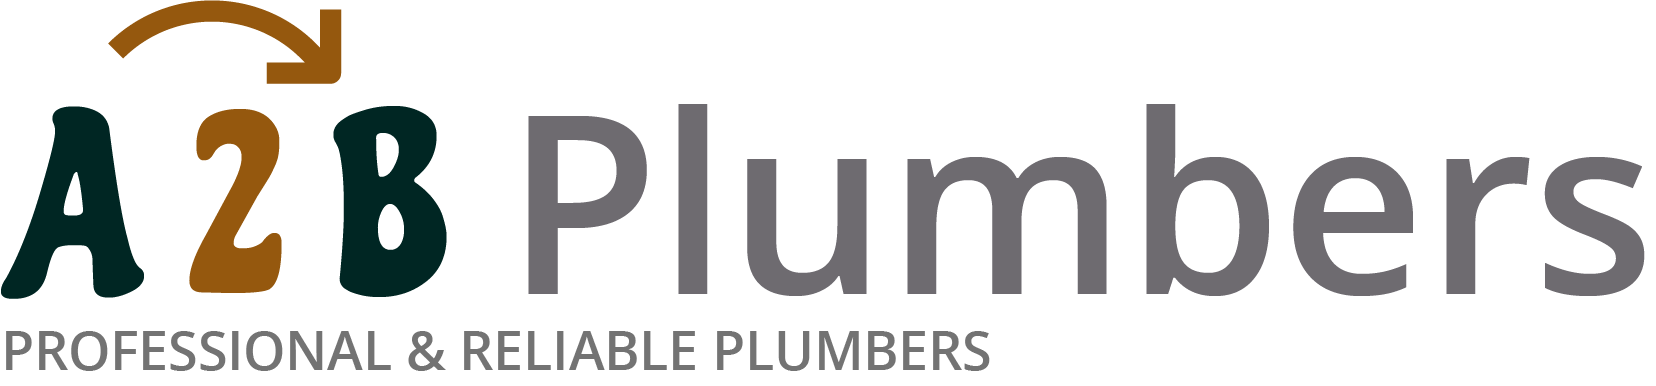 If you need a boiler installed, a radiator repaired or a leaking tap fixed, call us now - we provide services for properties in Limehouse and the local area.